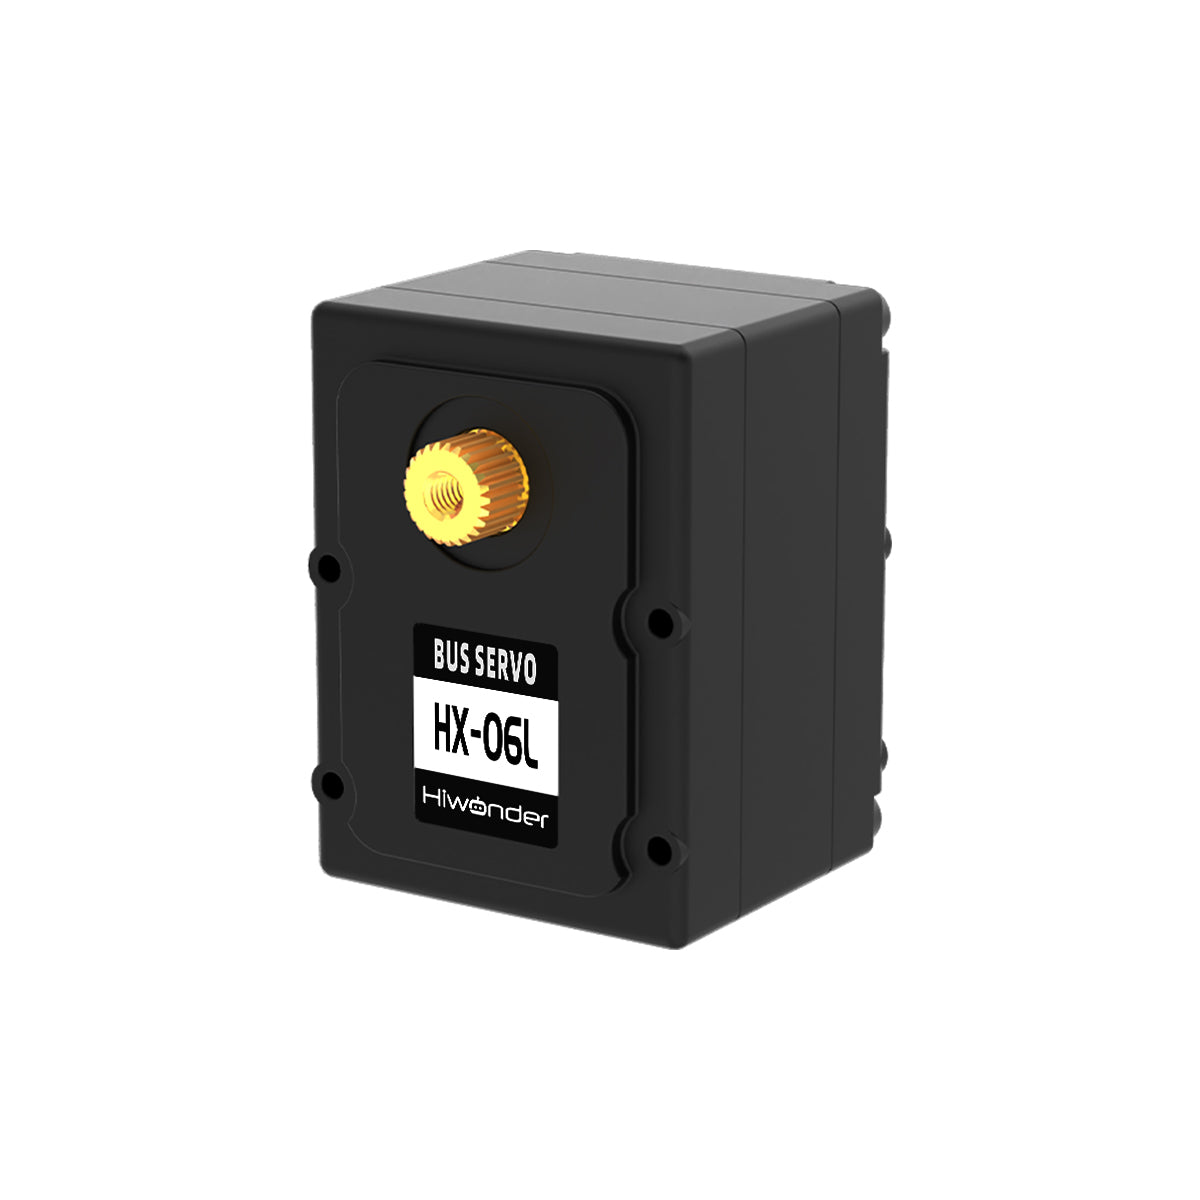 Hiwonder HX-06L Serial Bus Servo With Double Shaft, 6KG Torque and Data Feedback Function